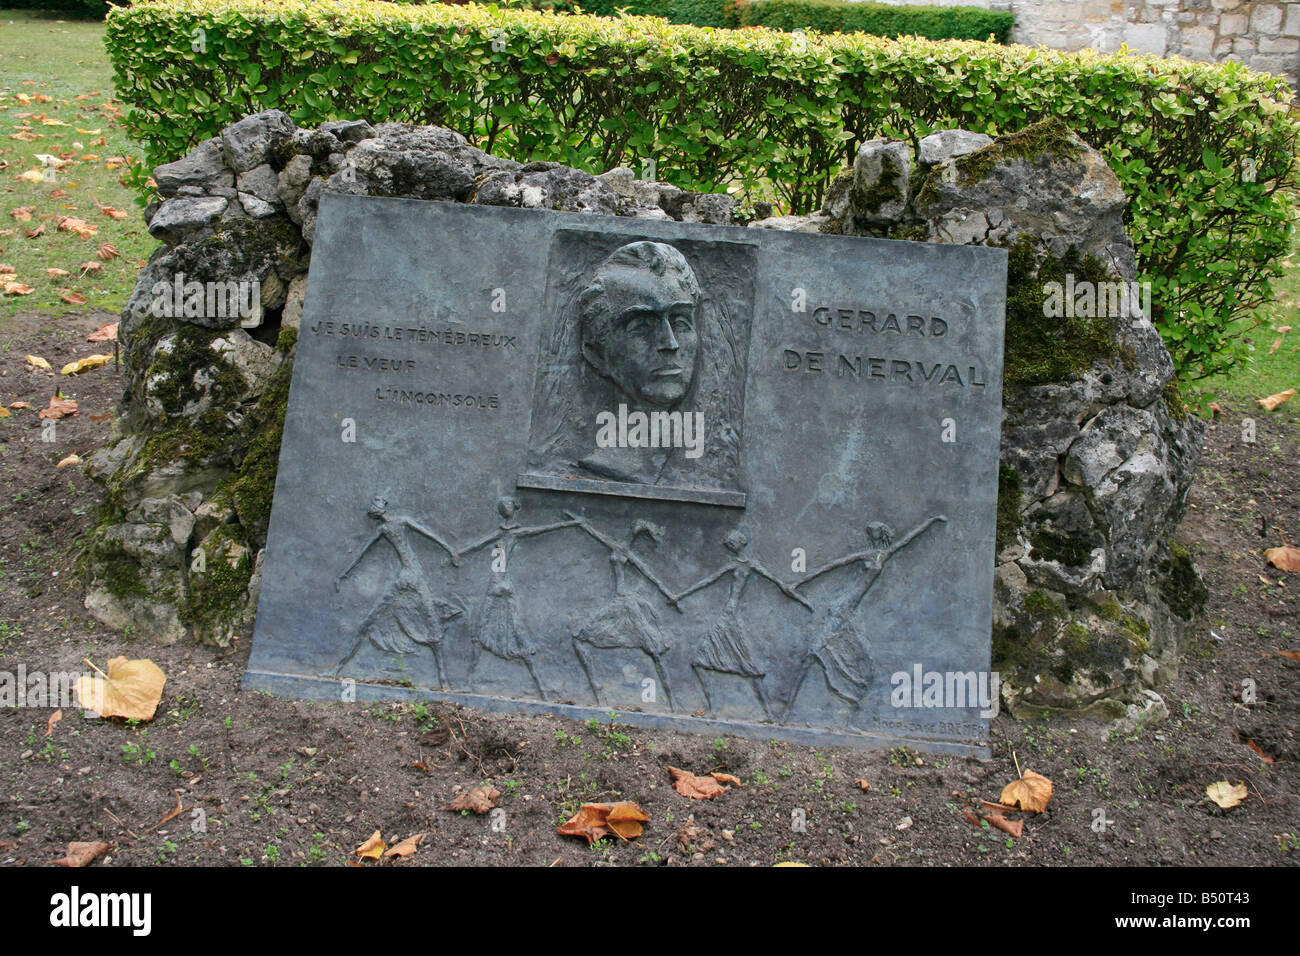 Plaque in the memory of the French poet Gerard de Nerval a frequent visiteur of the town of Senlis Stock Photo